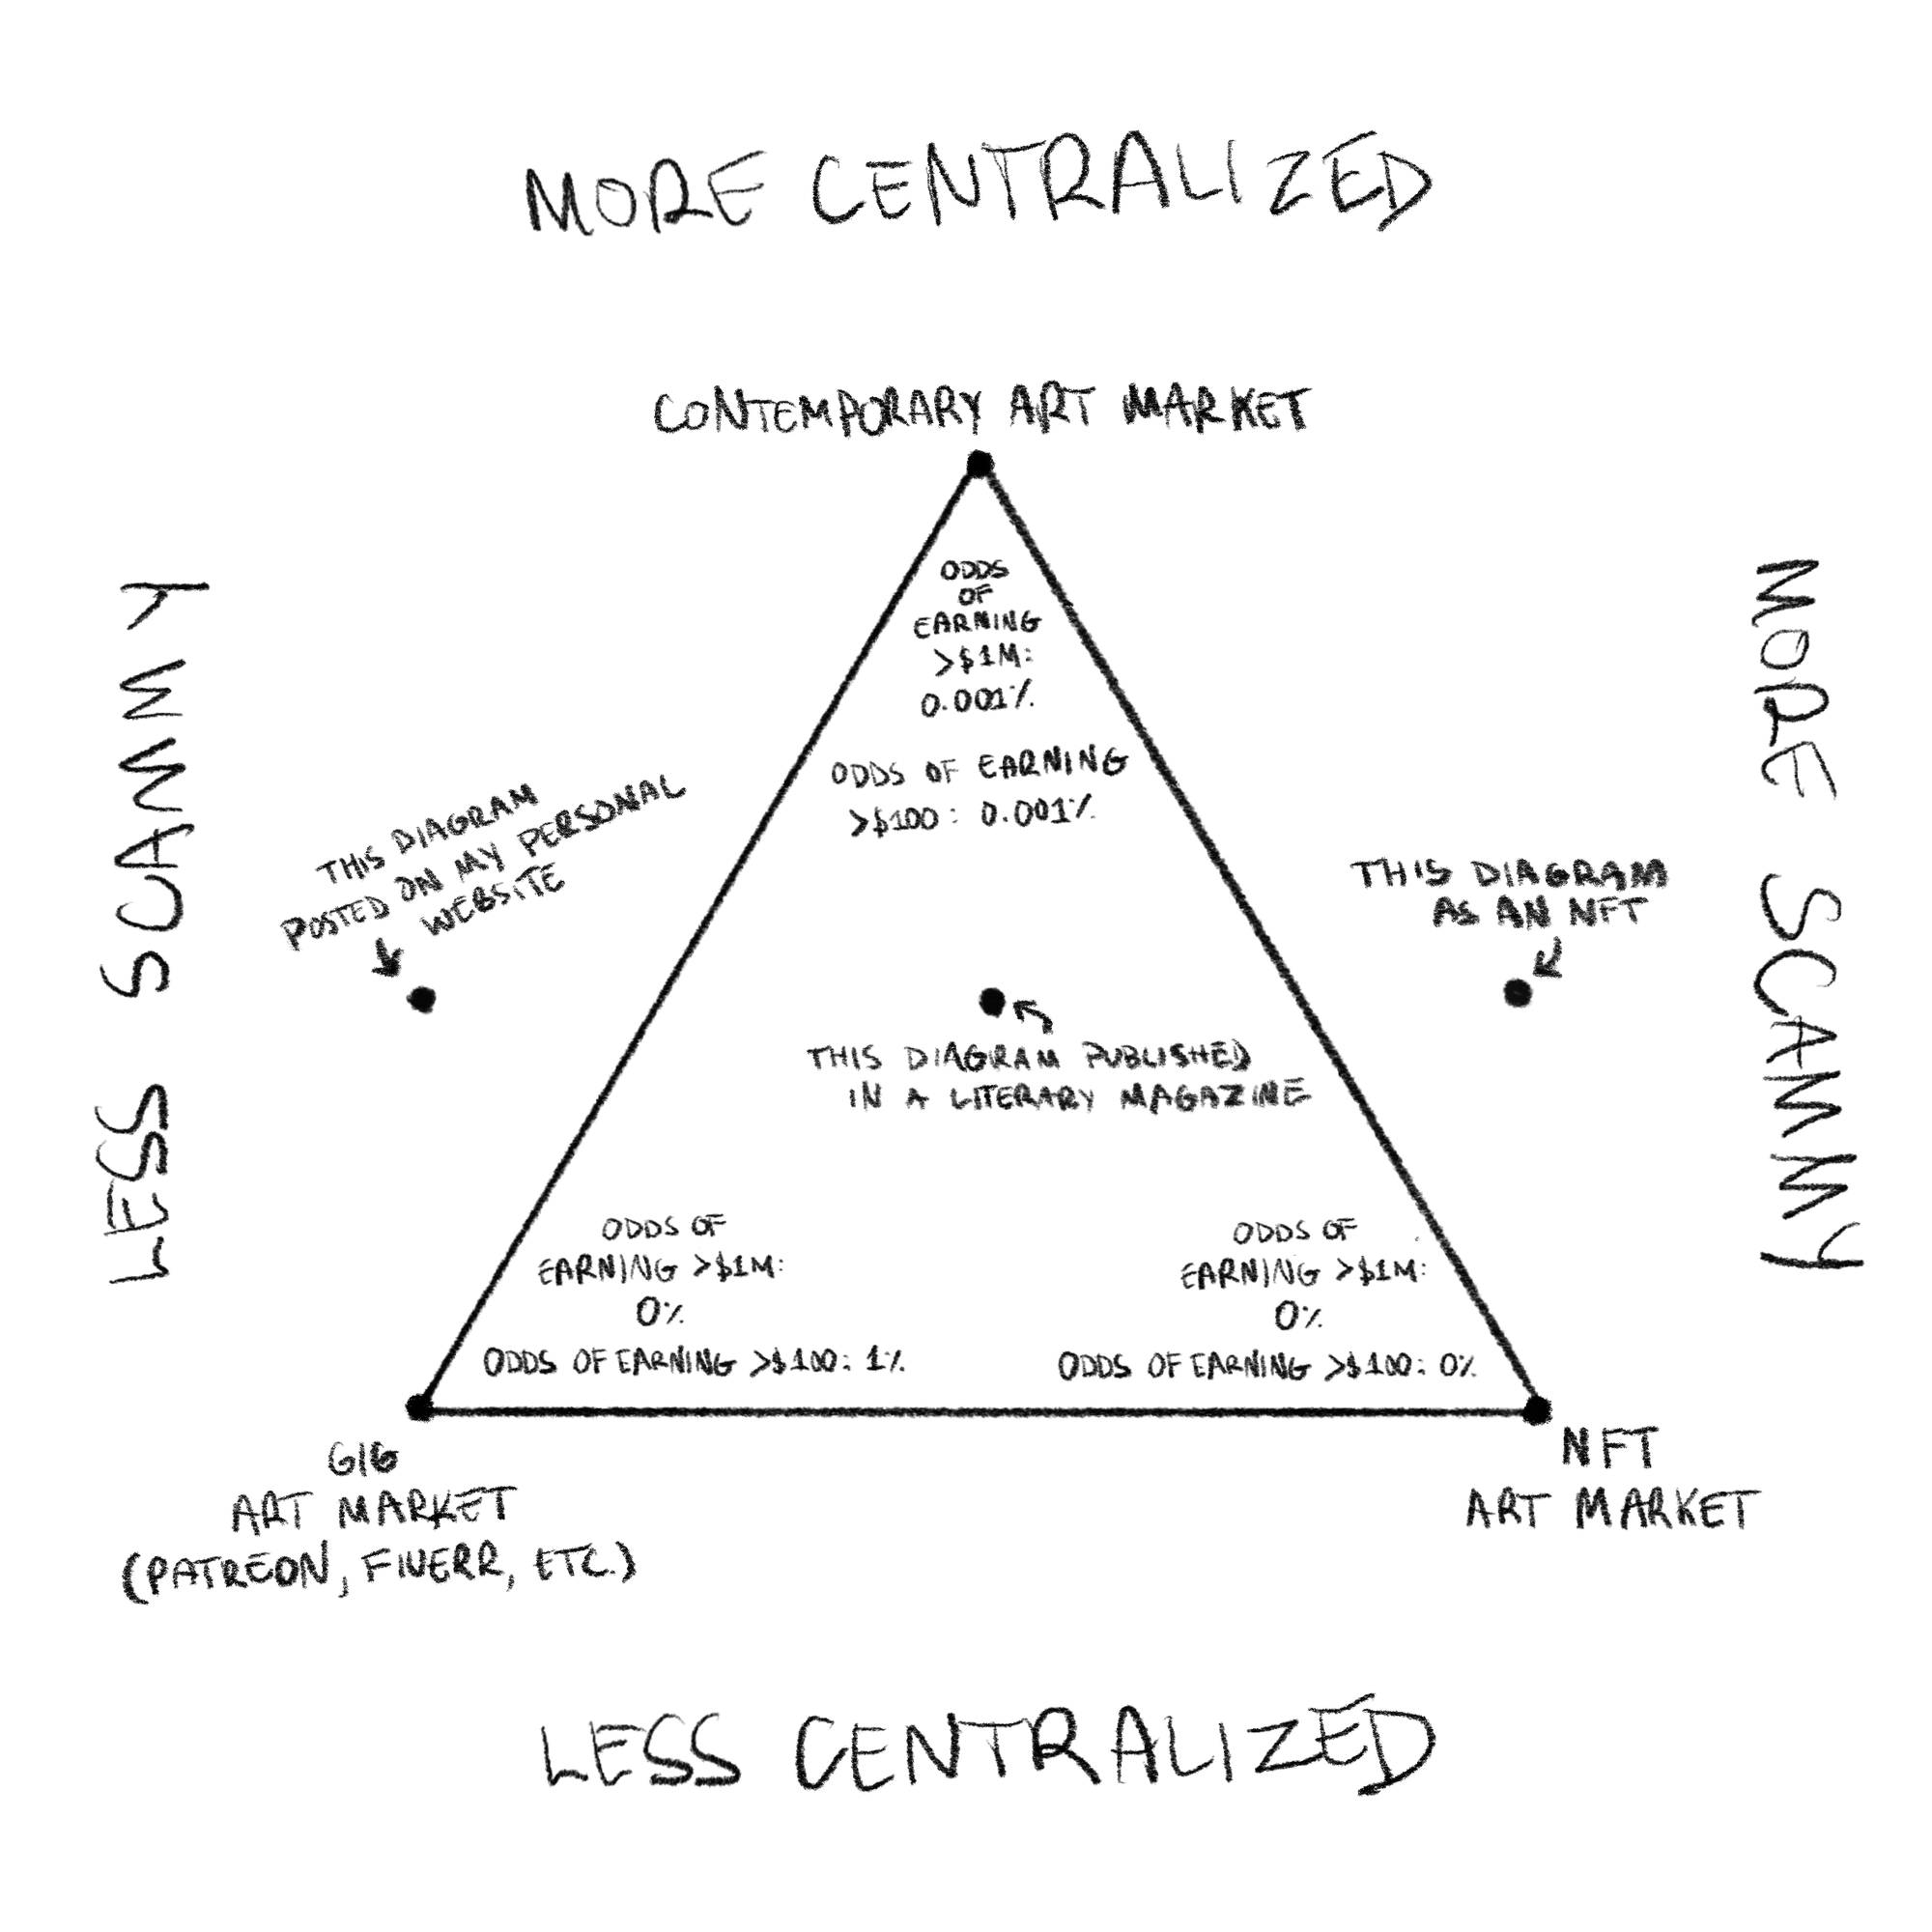 Triangular diagram with two axes: at top and bottom, the words "MORE CENTRALIZED" and "LESS CENTRALIZED"; at left and right, the words "LESS SCAMMY" and "MORE SCAMMY". An equilateral triangle at center, with its top point centered under the words "MORE CENTRALIZED" and labeled "CONTEMPORARY ART MARKET". Annotation inside the top point reads, "ODDS OF EARNING >$1M: 0.001% ODDS OF EARNING >$100: 0.001%". The triangle's bottom-left point, at the bottom-left corner of the diagram, is labeled "GIG ART MARKET (PATREON, FIVERR, ETC.)", its annotation reading, "ODDS OF EARNING >$1M: 0% ODDS OF EARNING >$100: 1%". The triangle's bottom-right point, at the bottom-right corner of the diagram, is labelled "NFT ART MARKET", its annotation reading, "ODDS OF EARNING >$1M: 0% ODDS OF EARNING >$100: 0%". Midway along the right edge of the diagram is a dot labeled "THIS DIAGRAM POSTED ON MY PERSONAL WEBSITE." Midway along the left edge of the diagram is a dot labeled "THIS DIAGRAM AS AN NFT". In the dead center of the triangle is a dot labeled "THIS DIAGRAM PUBLISHED IN A LITERARY MAGAZINE".